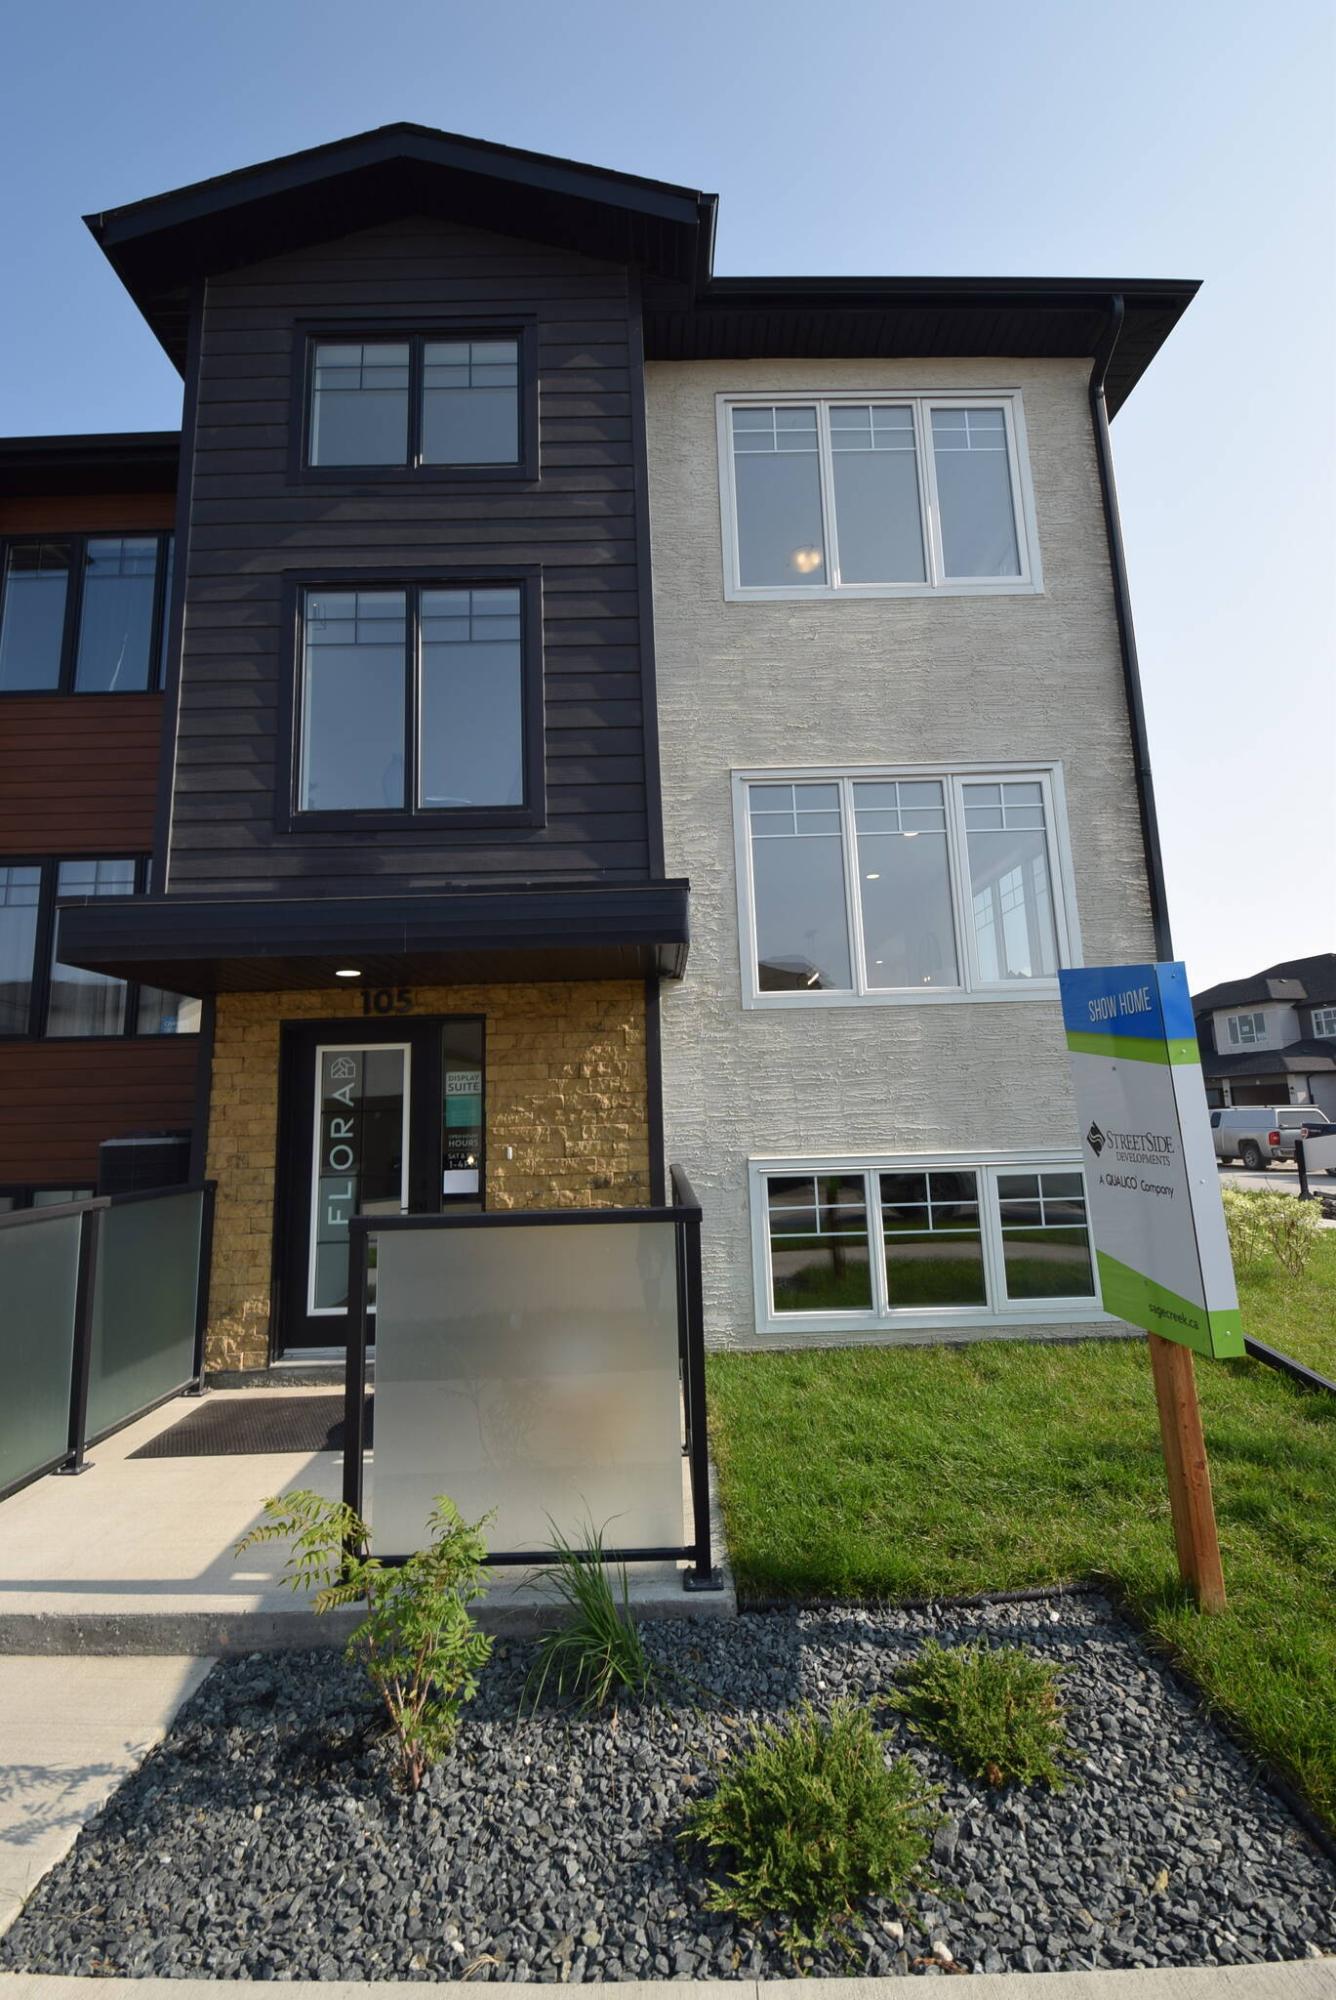  <p>Todd Lewys / Winnipeg Free Press</p>
                                <p>Located on a quiet street in Sage Creek, Flora North Condominiums features two efficiently-designed townhome models &mdash; the Iris and the Palm.</p> 